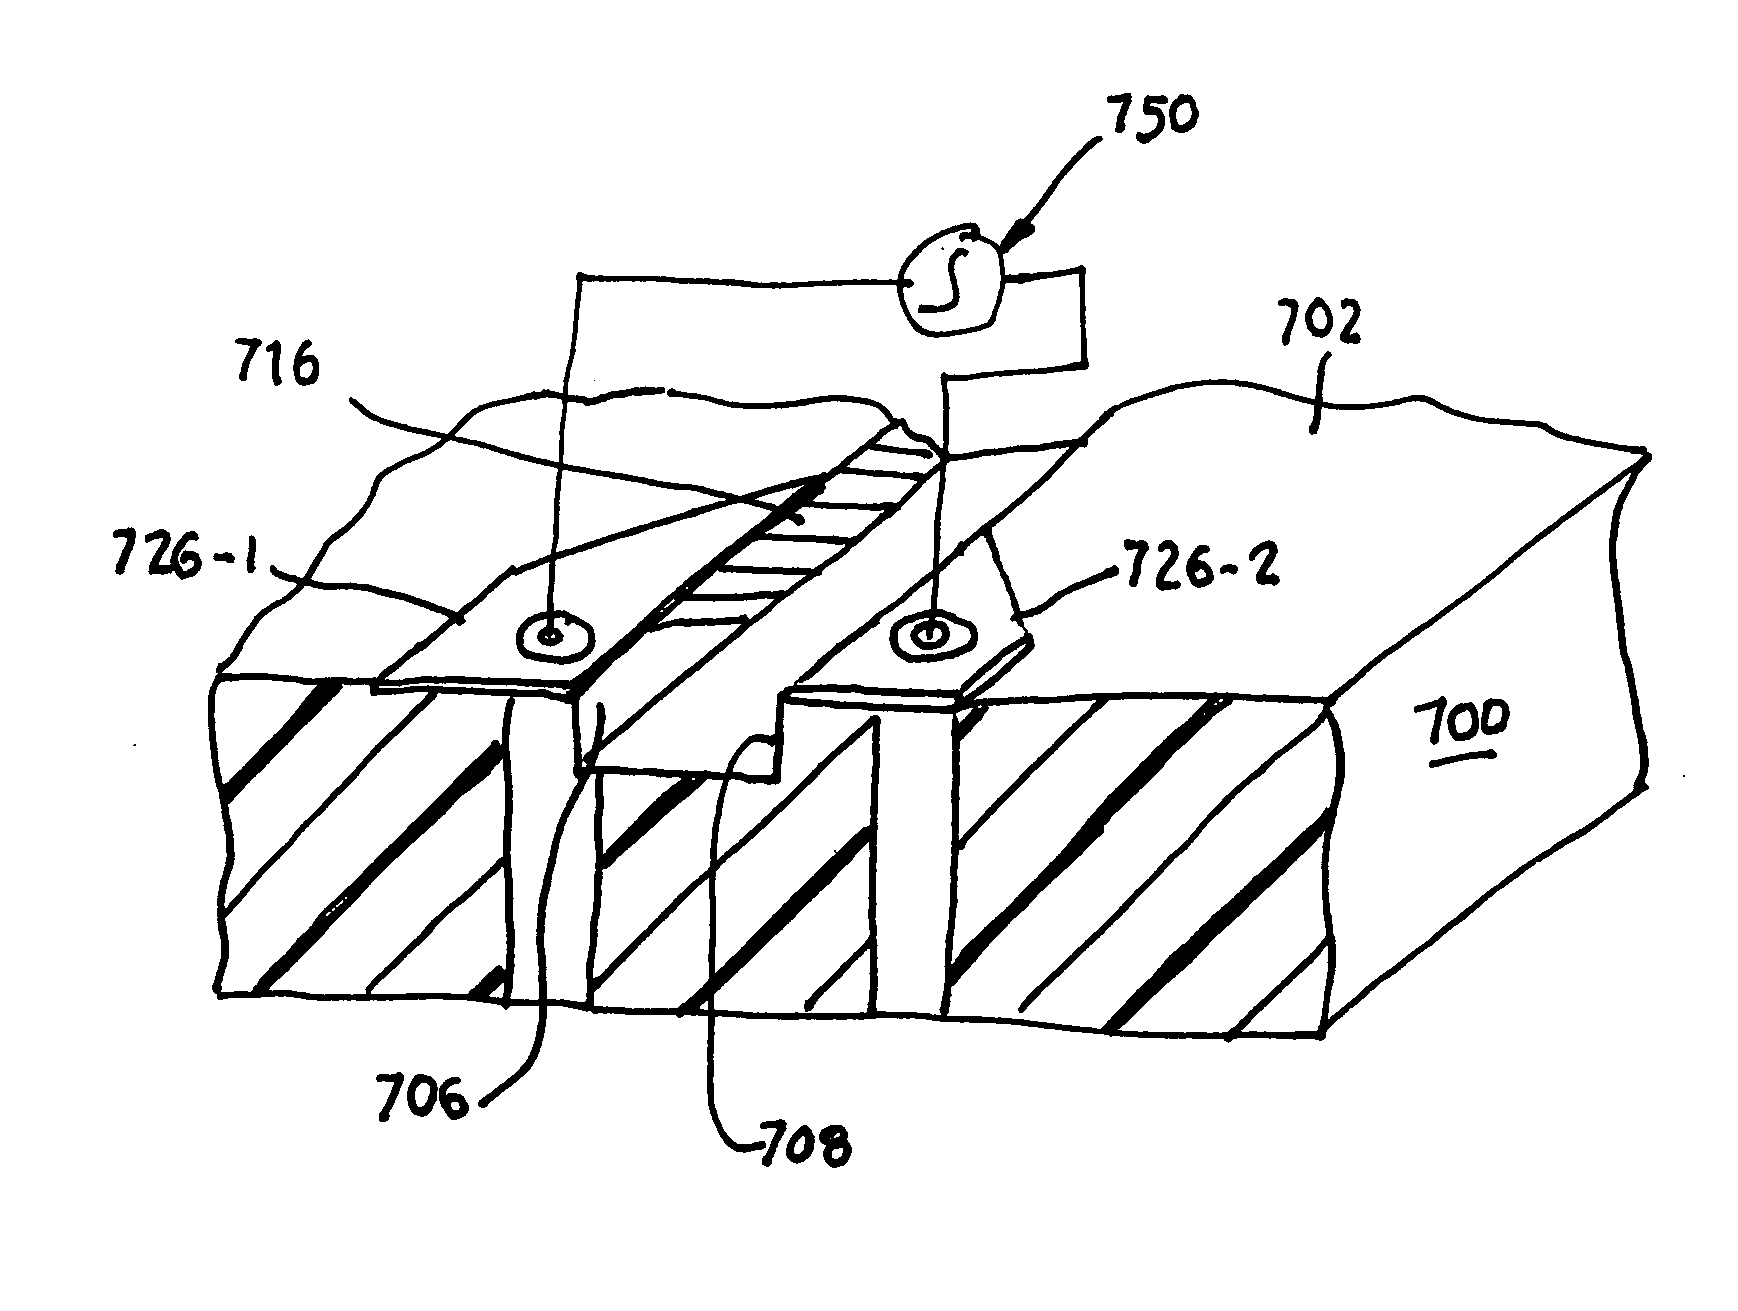 Transmission line with a transforming impedance and solder lands